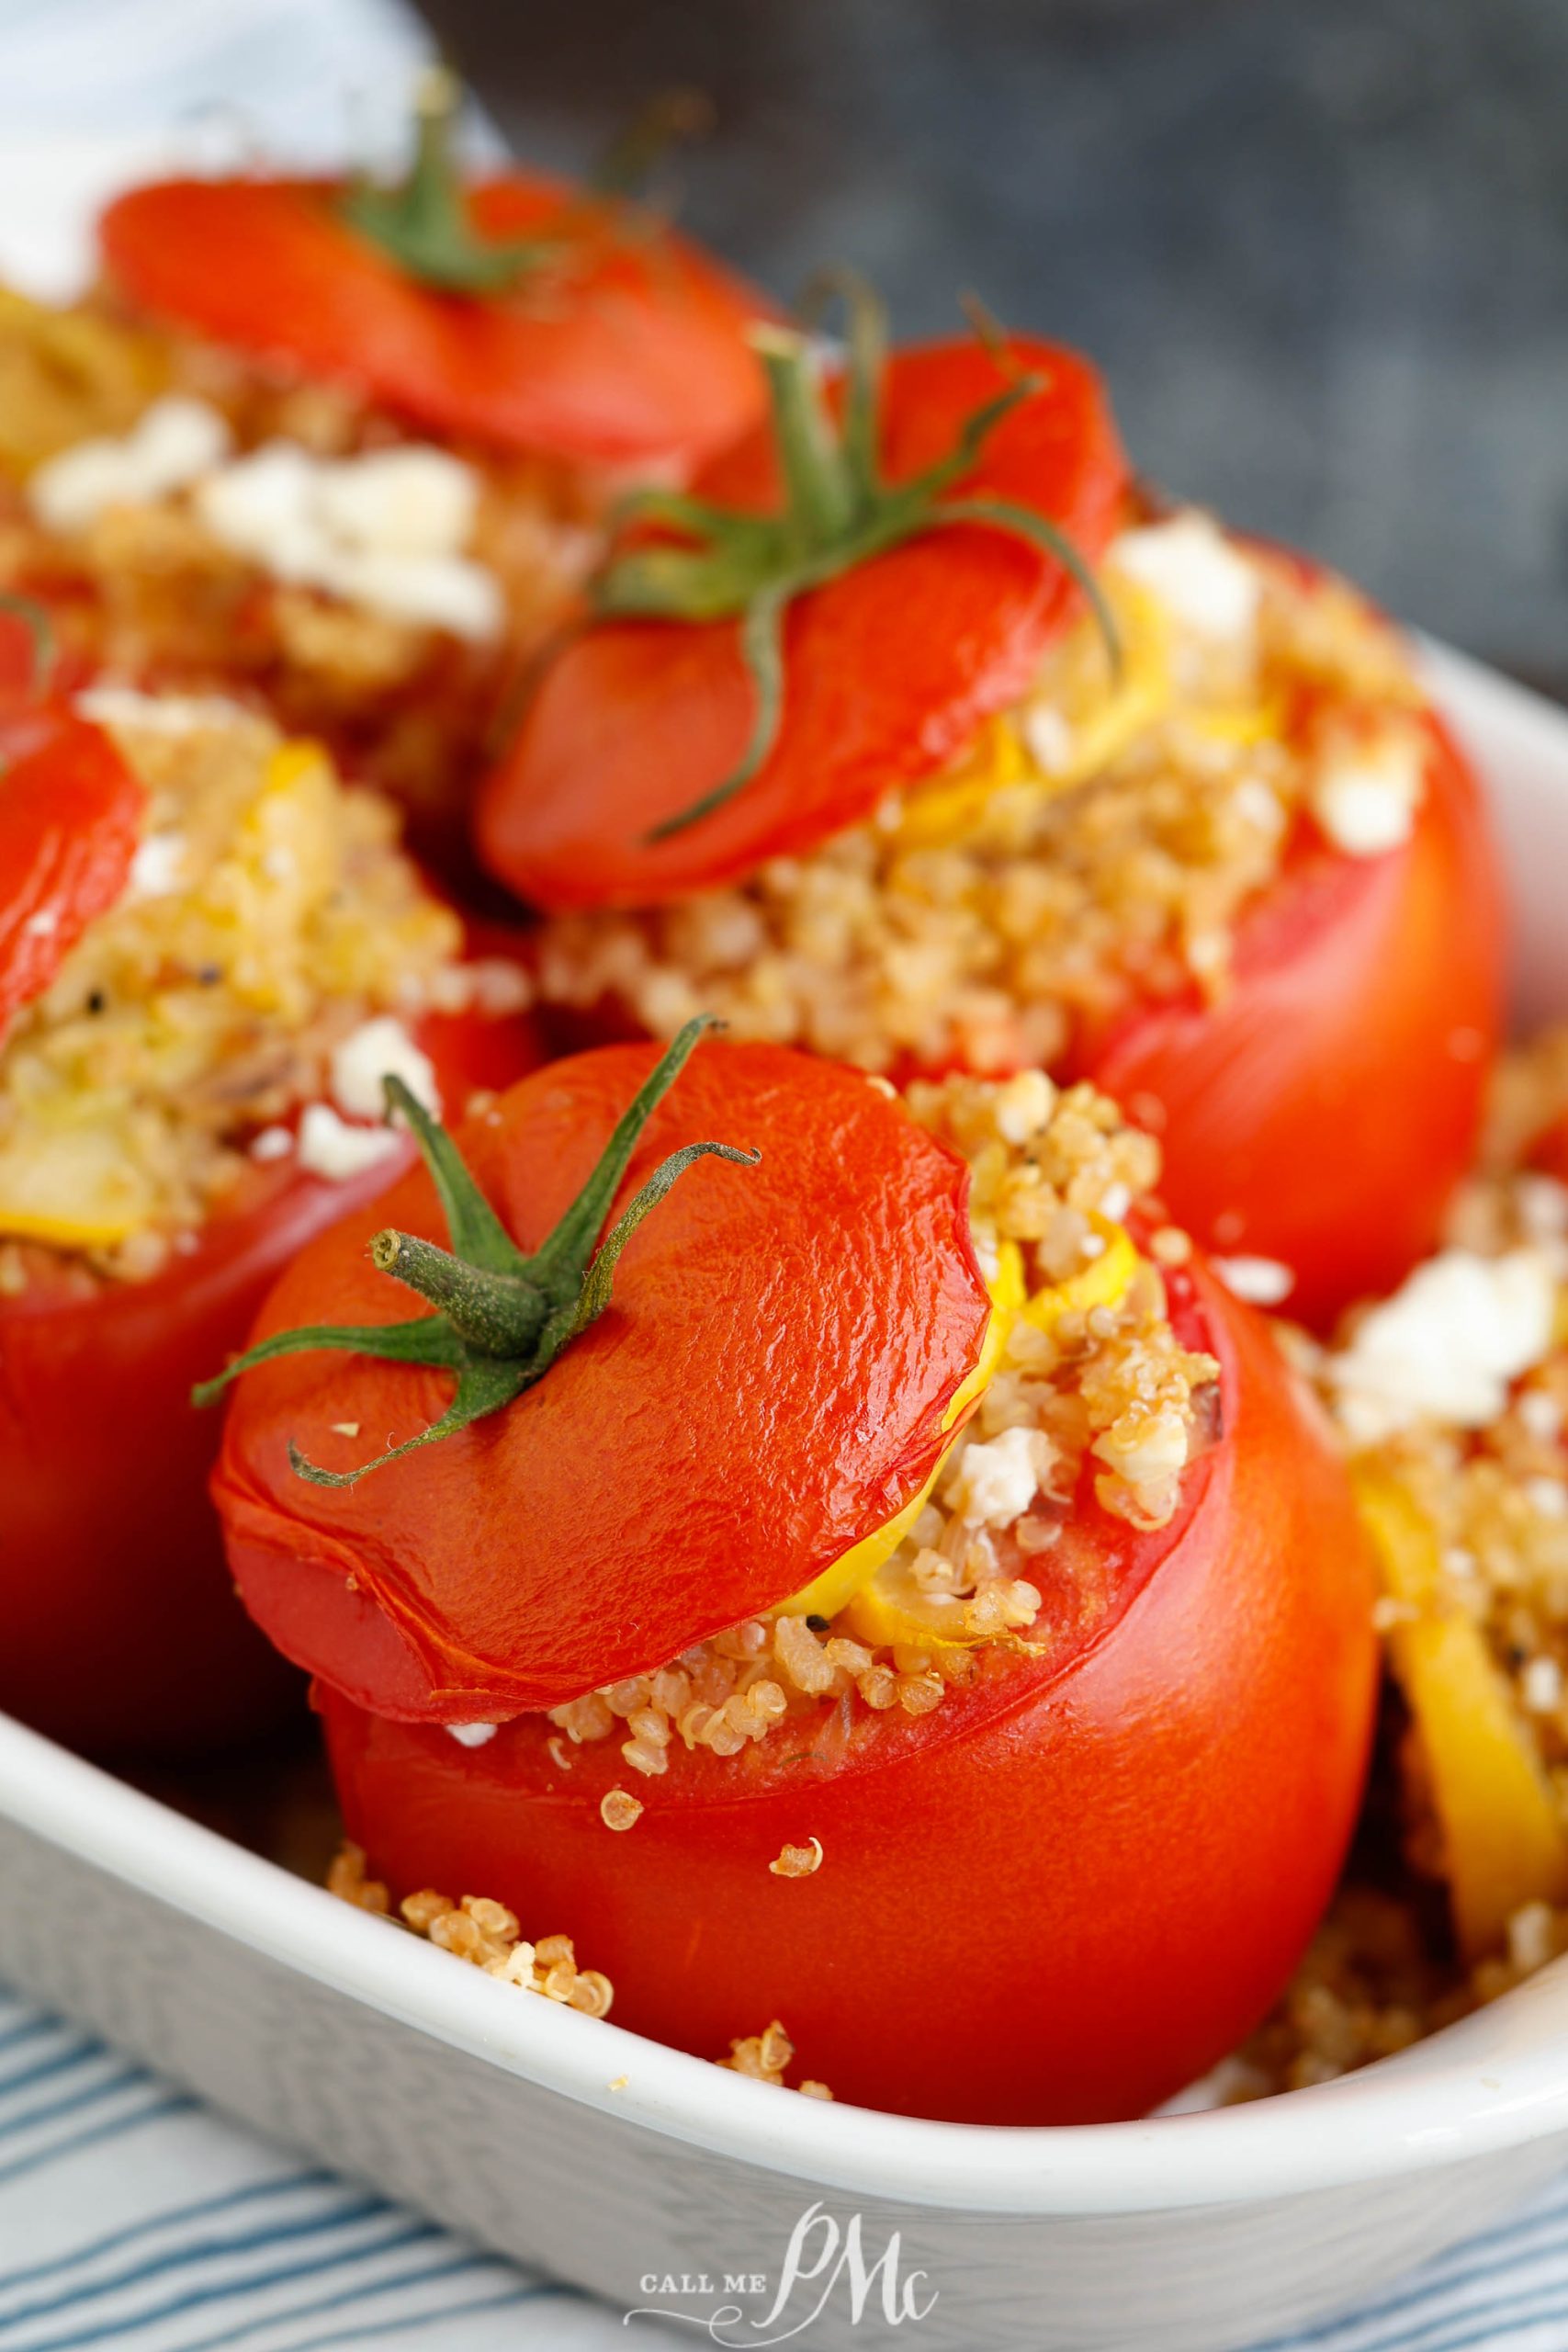 Quinoa and squash stuffed red tomatoes in a dish.